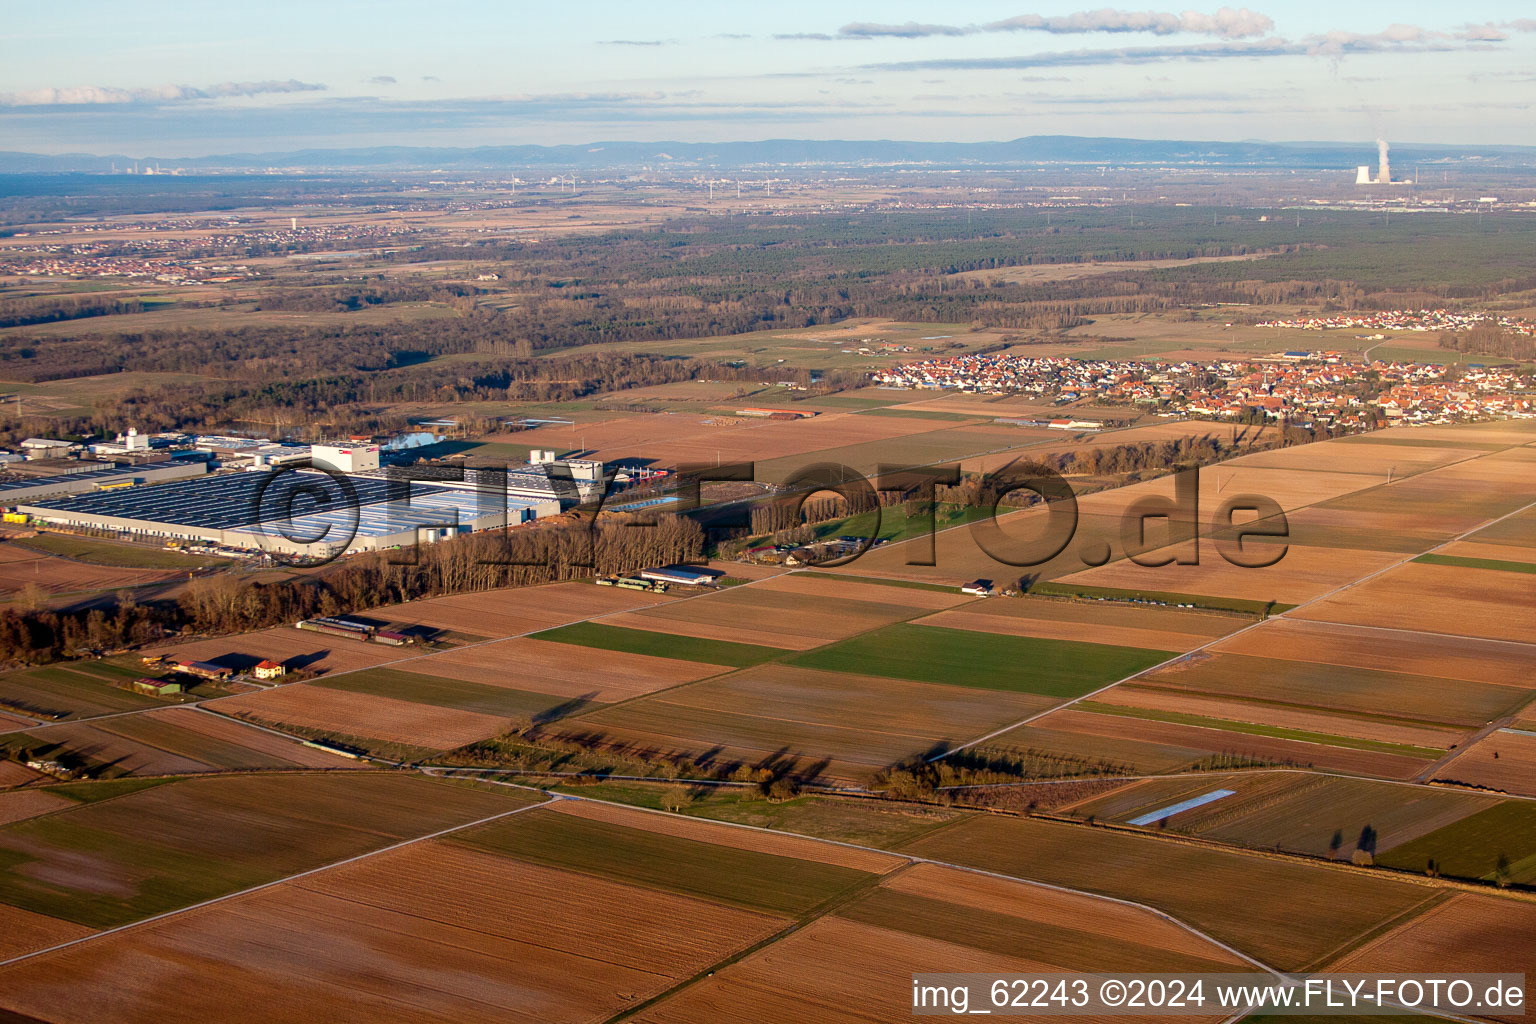 Oblique view of Offenbach an der Queich in the state Rhineland-Palatinate, Germany